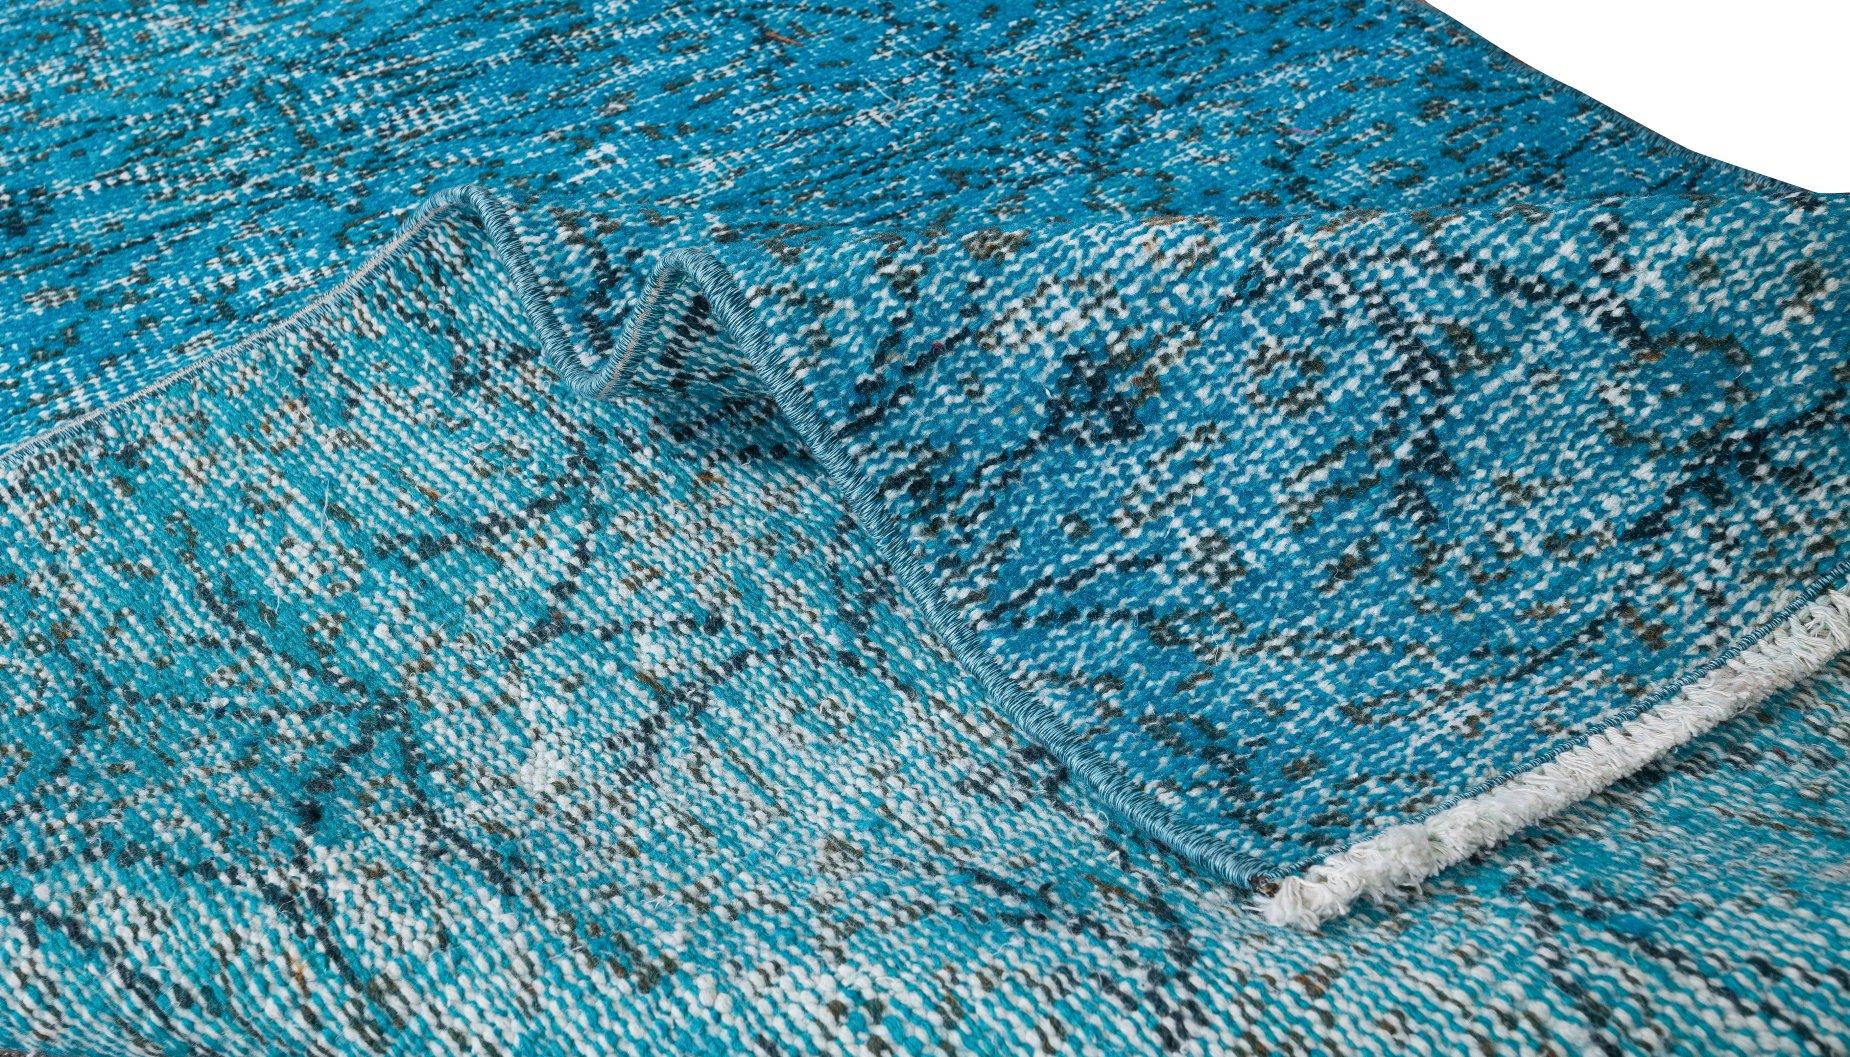 Hand-Woven 3x6 Ft Handmade Rug OverDyed in Teal Blue, Modern Turkish Small Turquoise Carpet For Sale